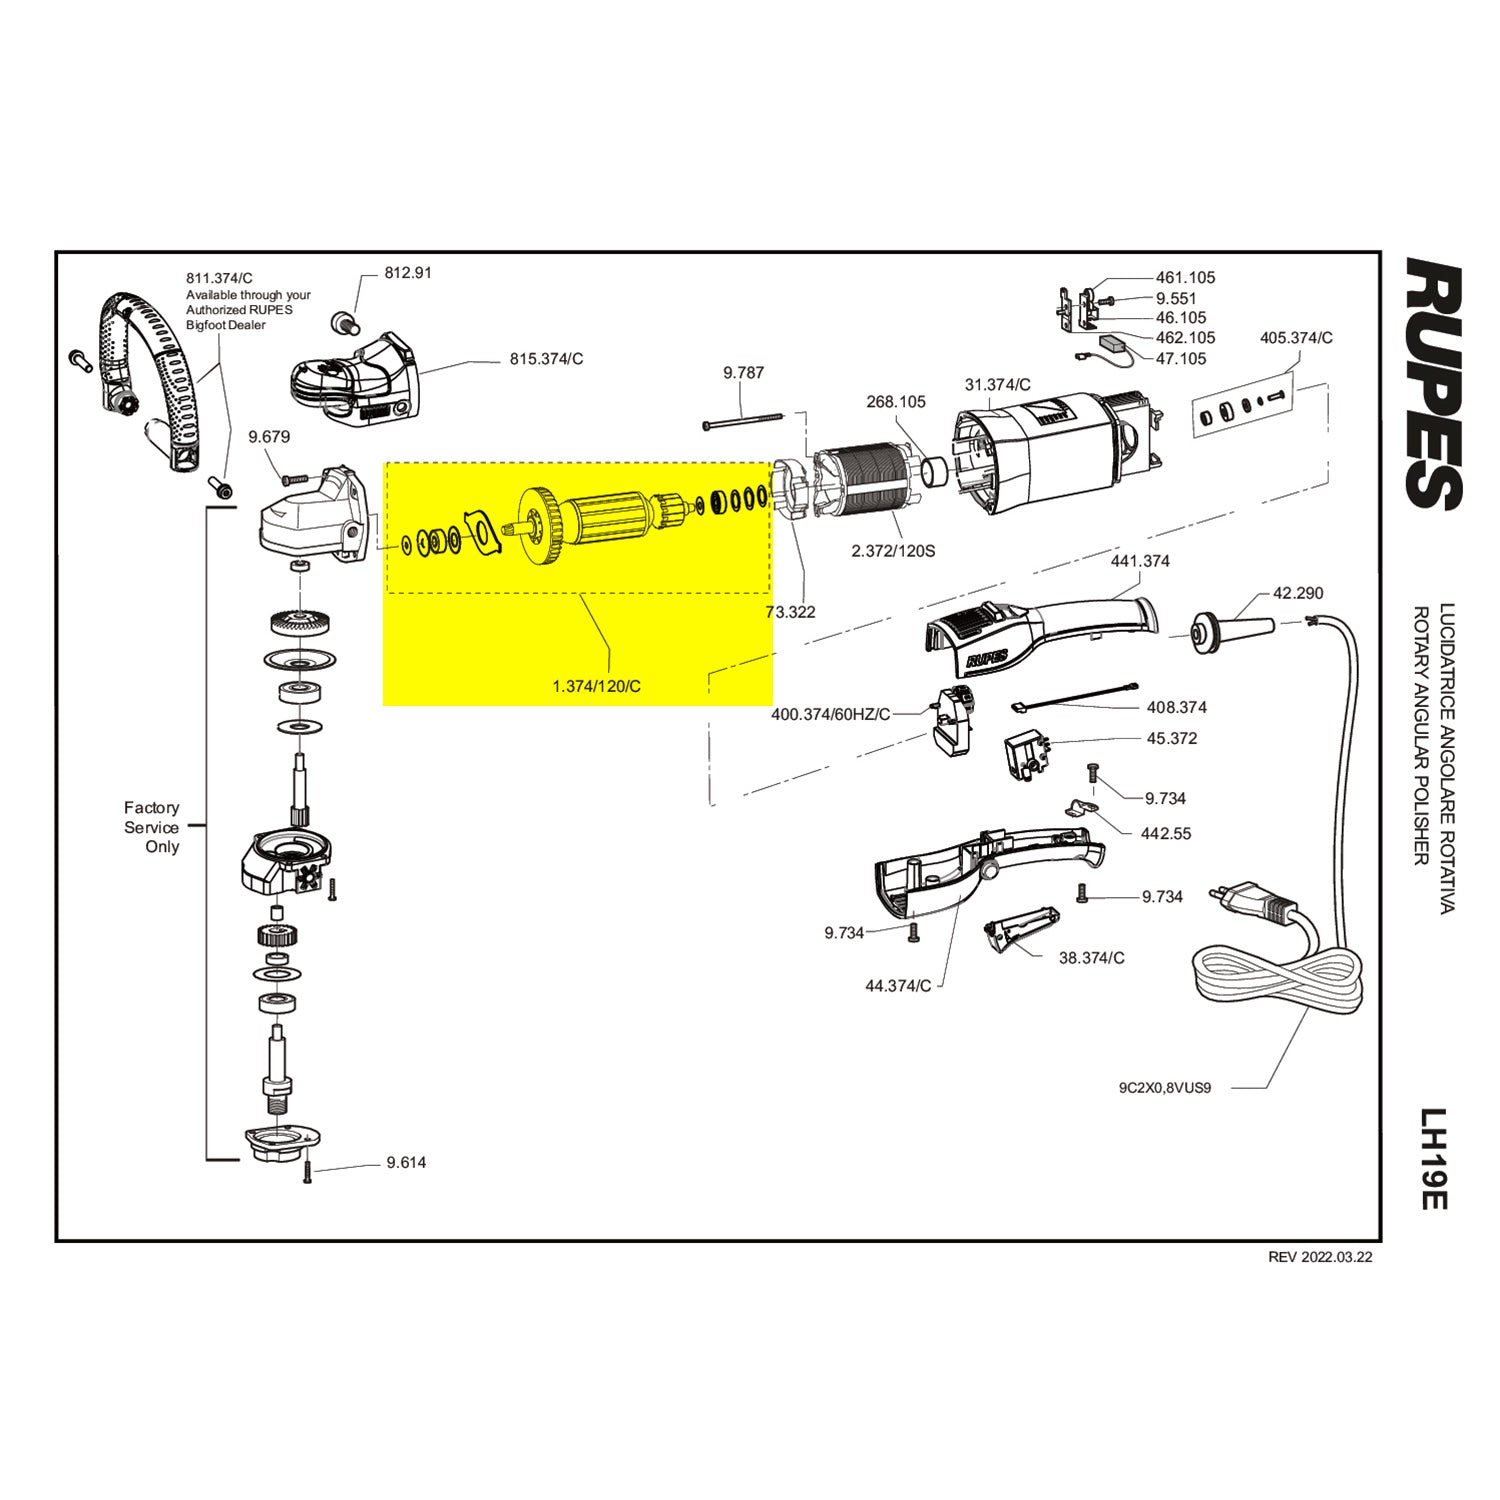 rotor-assembly-part-guide-lh19e